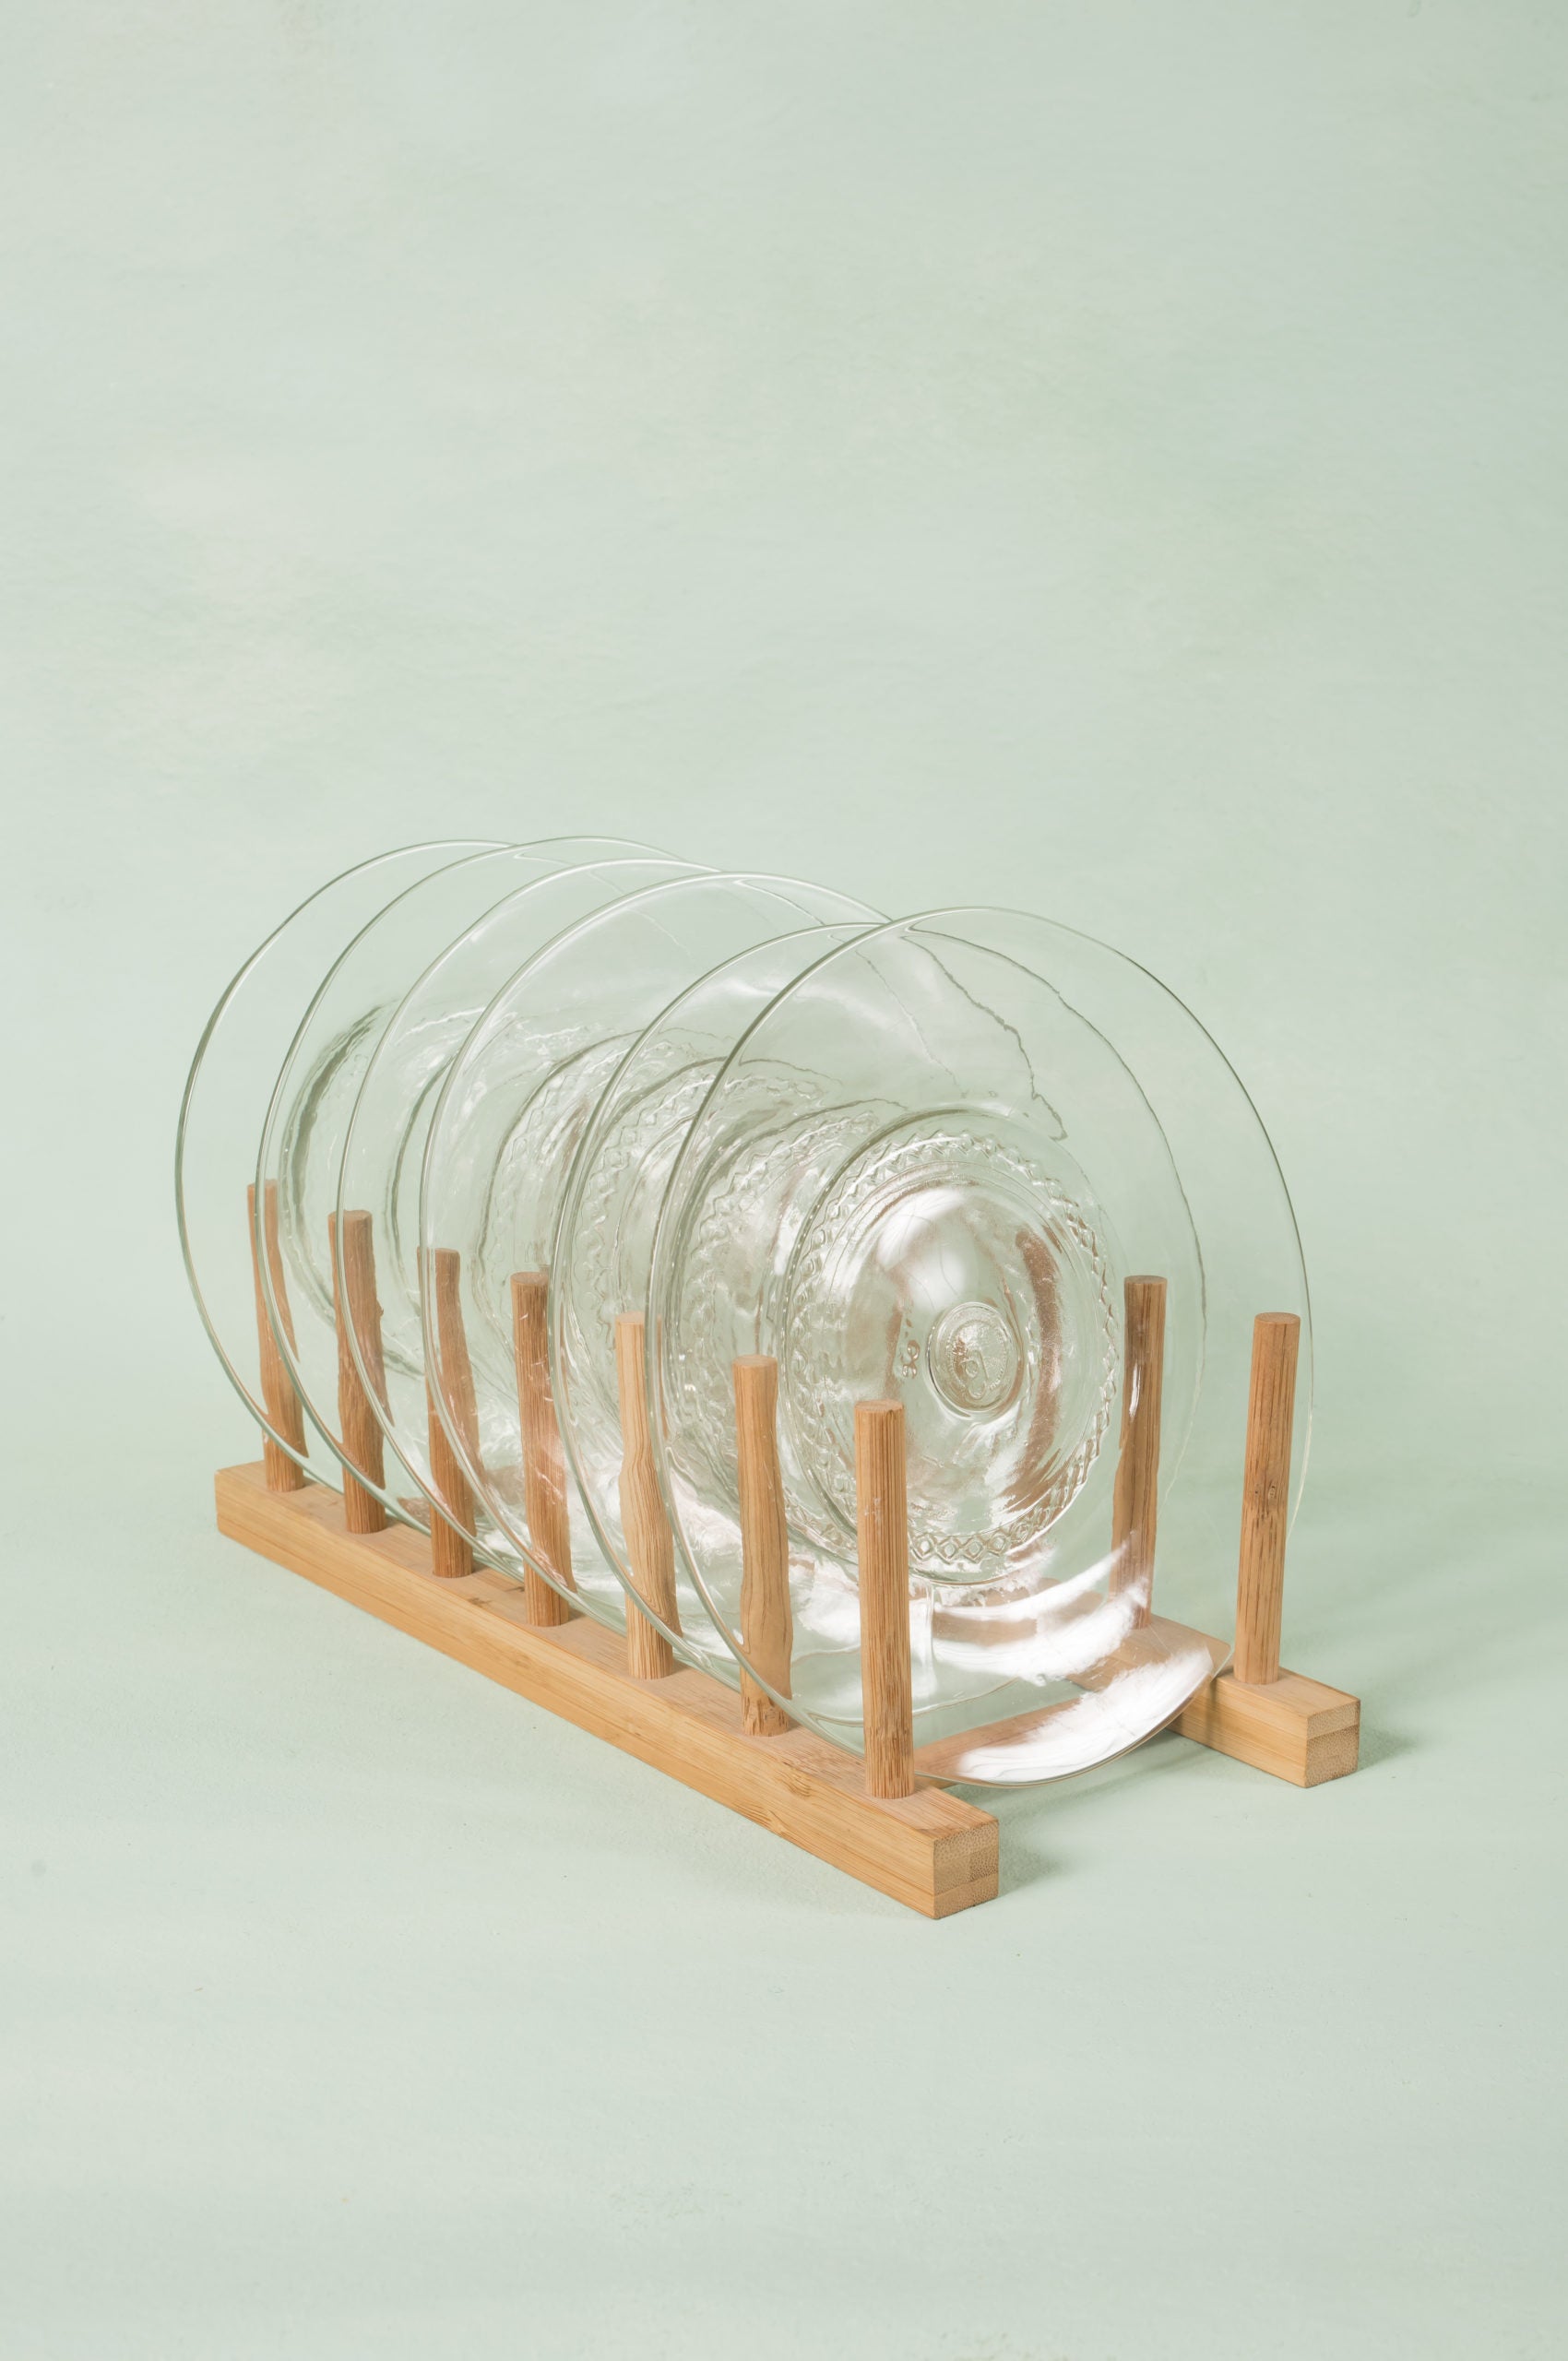 set of six clear appetizer side plates made from recycled glass, on wooden rack